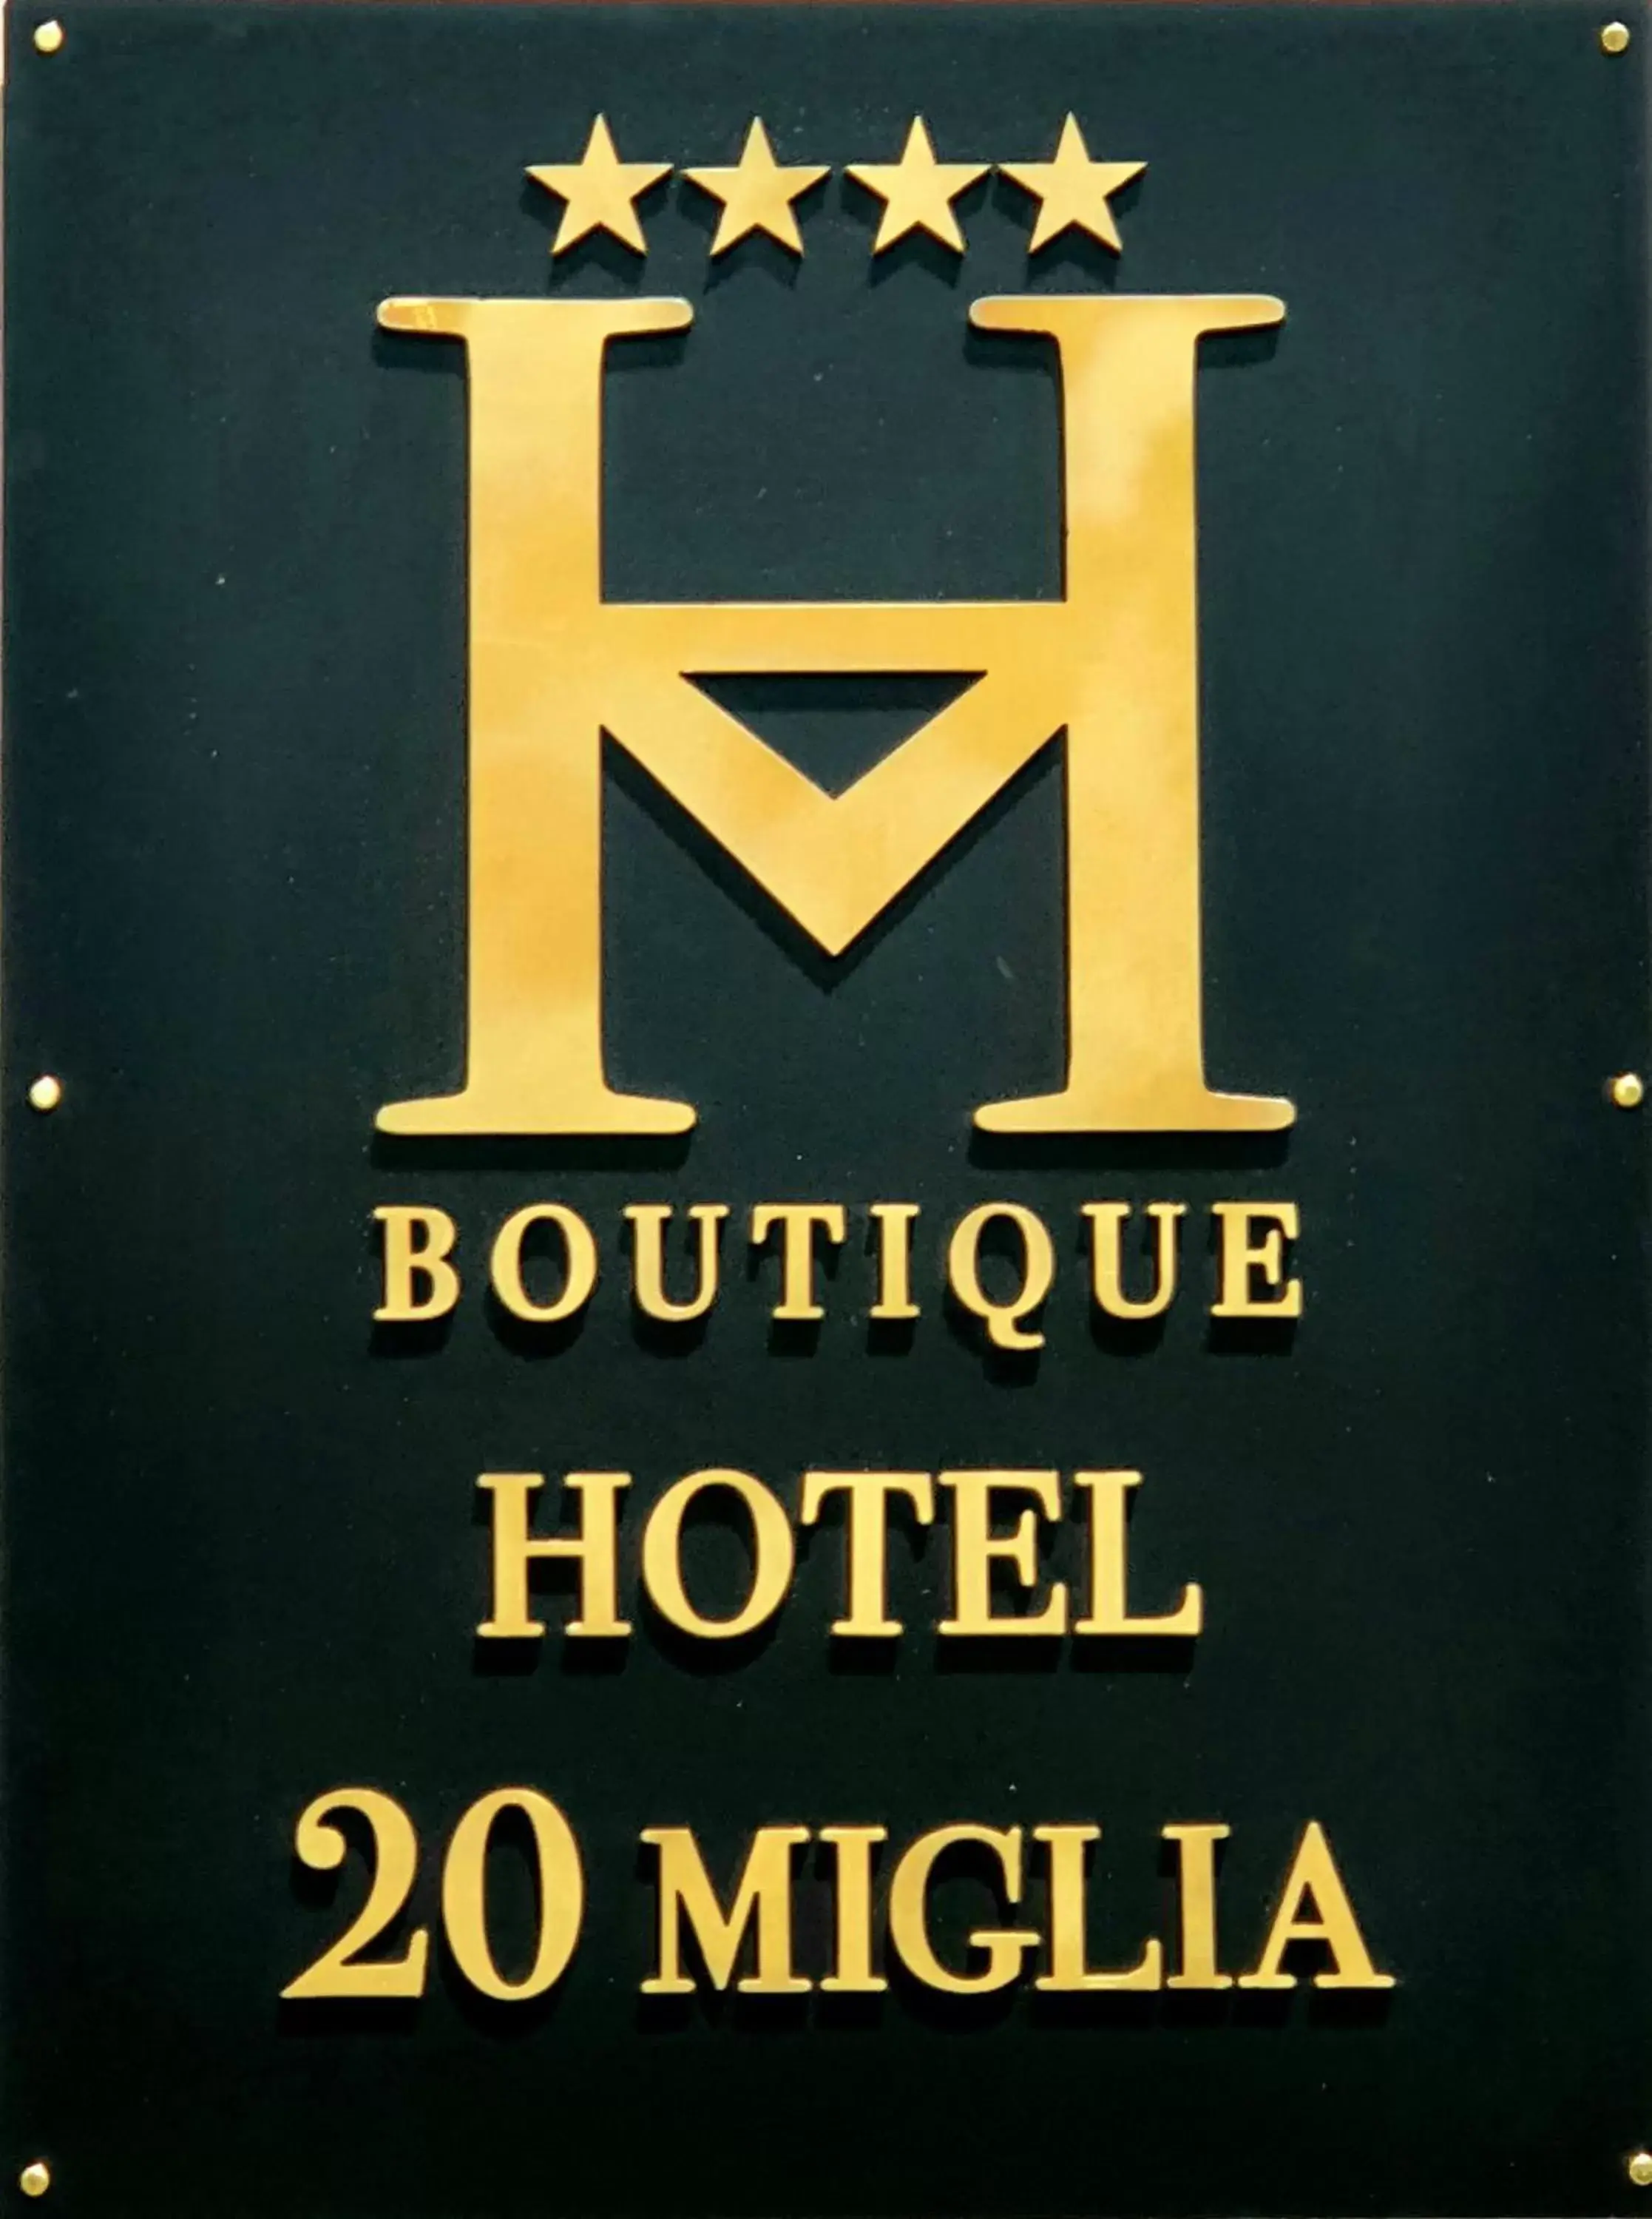 Property logo or sign in 20 Miglia Boutique Hotel